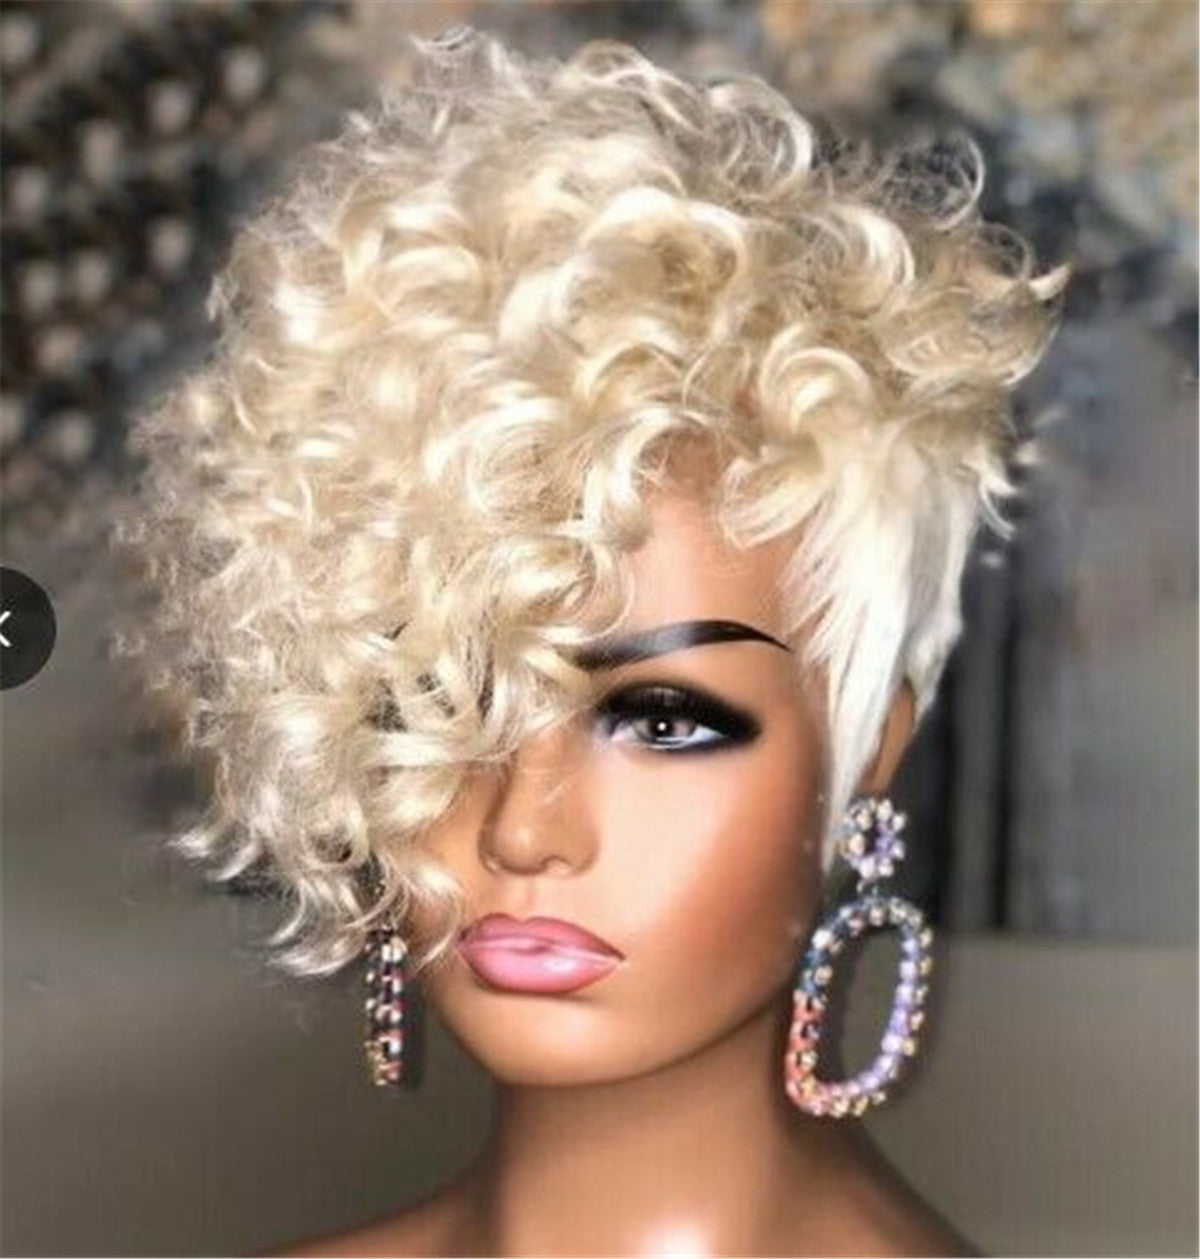 Short Platinum Blond Afro Curly Wave Pixie Cut Wig Synthetic Hair for Women Dress Party Full Wig - GOLDEN TOUCH APPARELS WOMEN